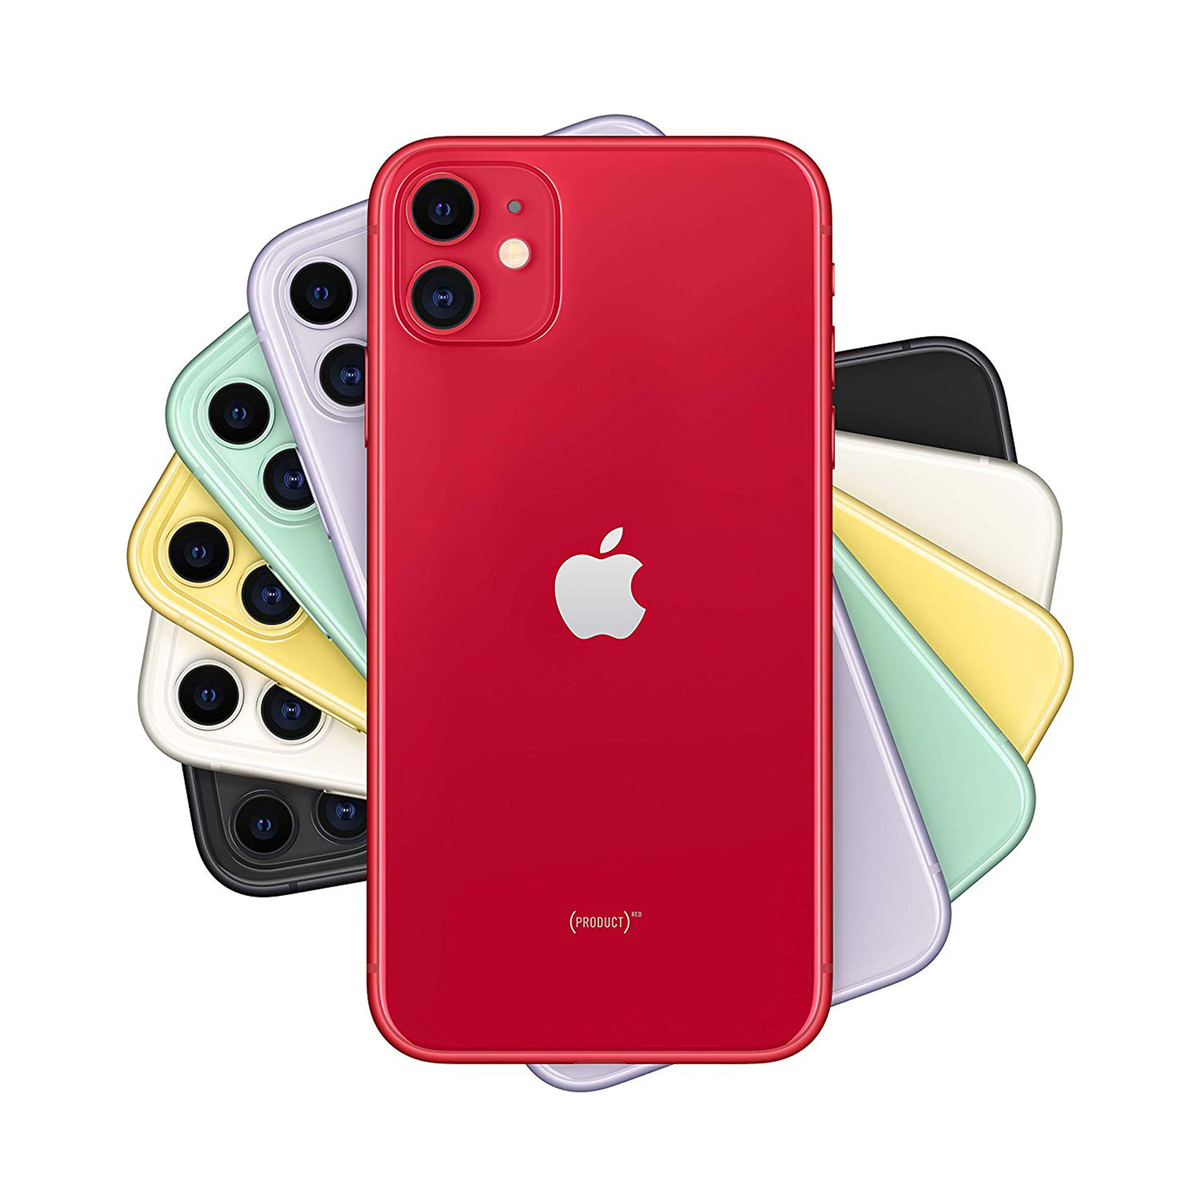 Apple iPhone 11 128GB PRODUCT(Red)